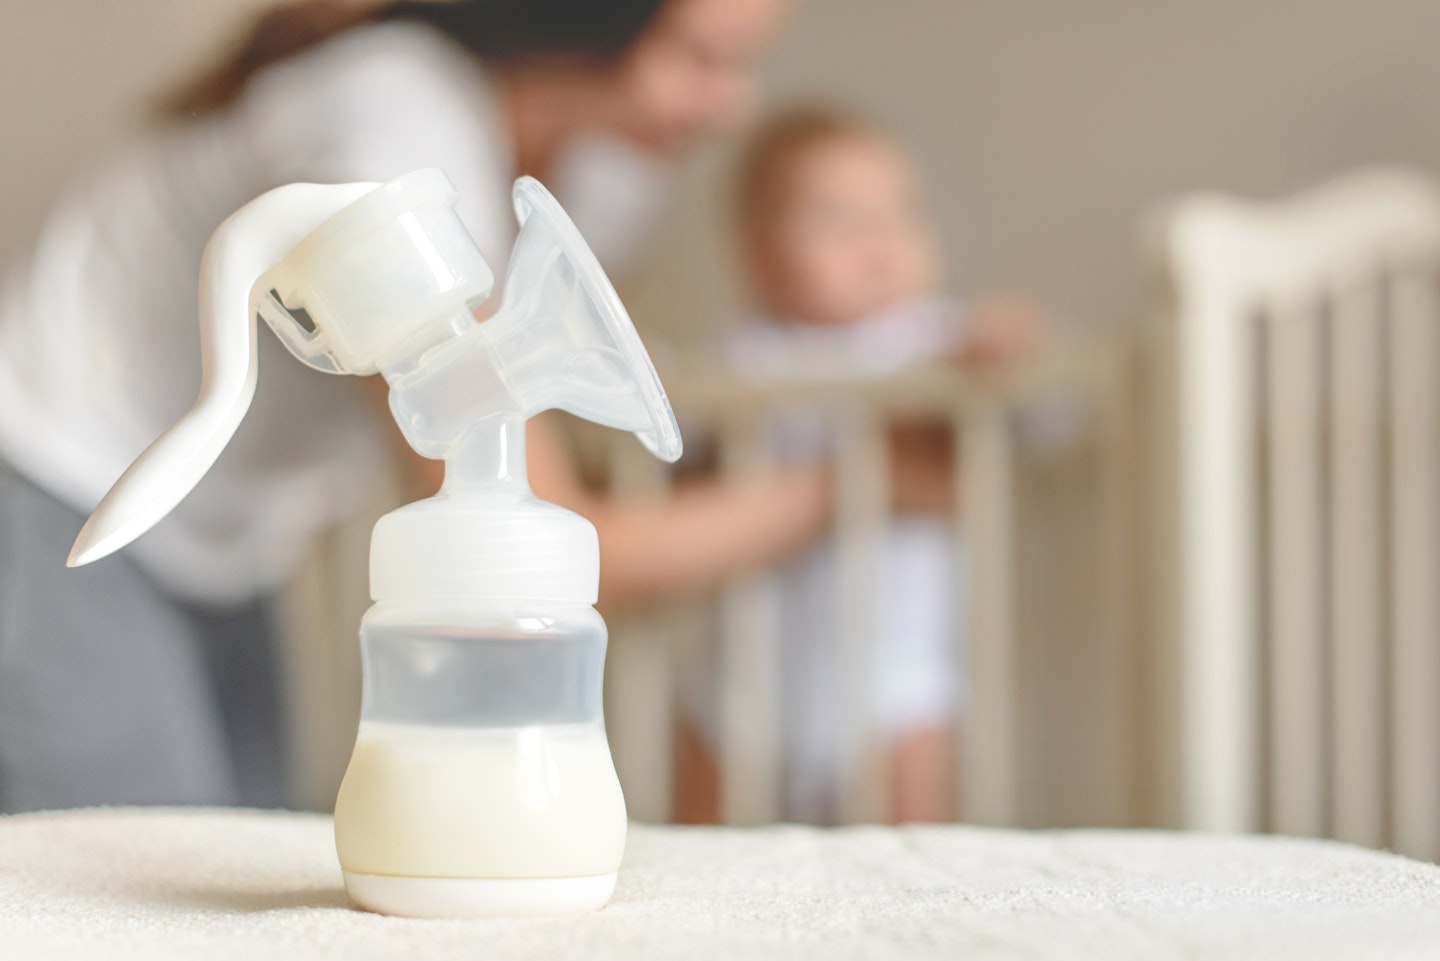 Breast pump on table with mother and baby in background